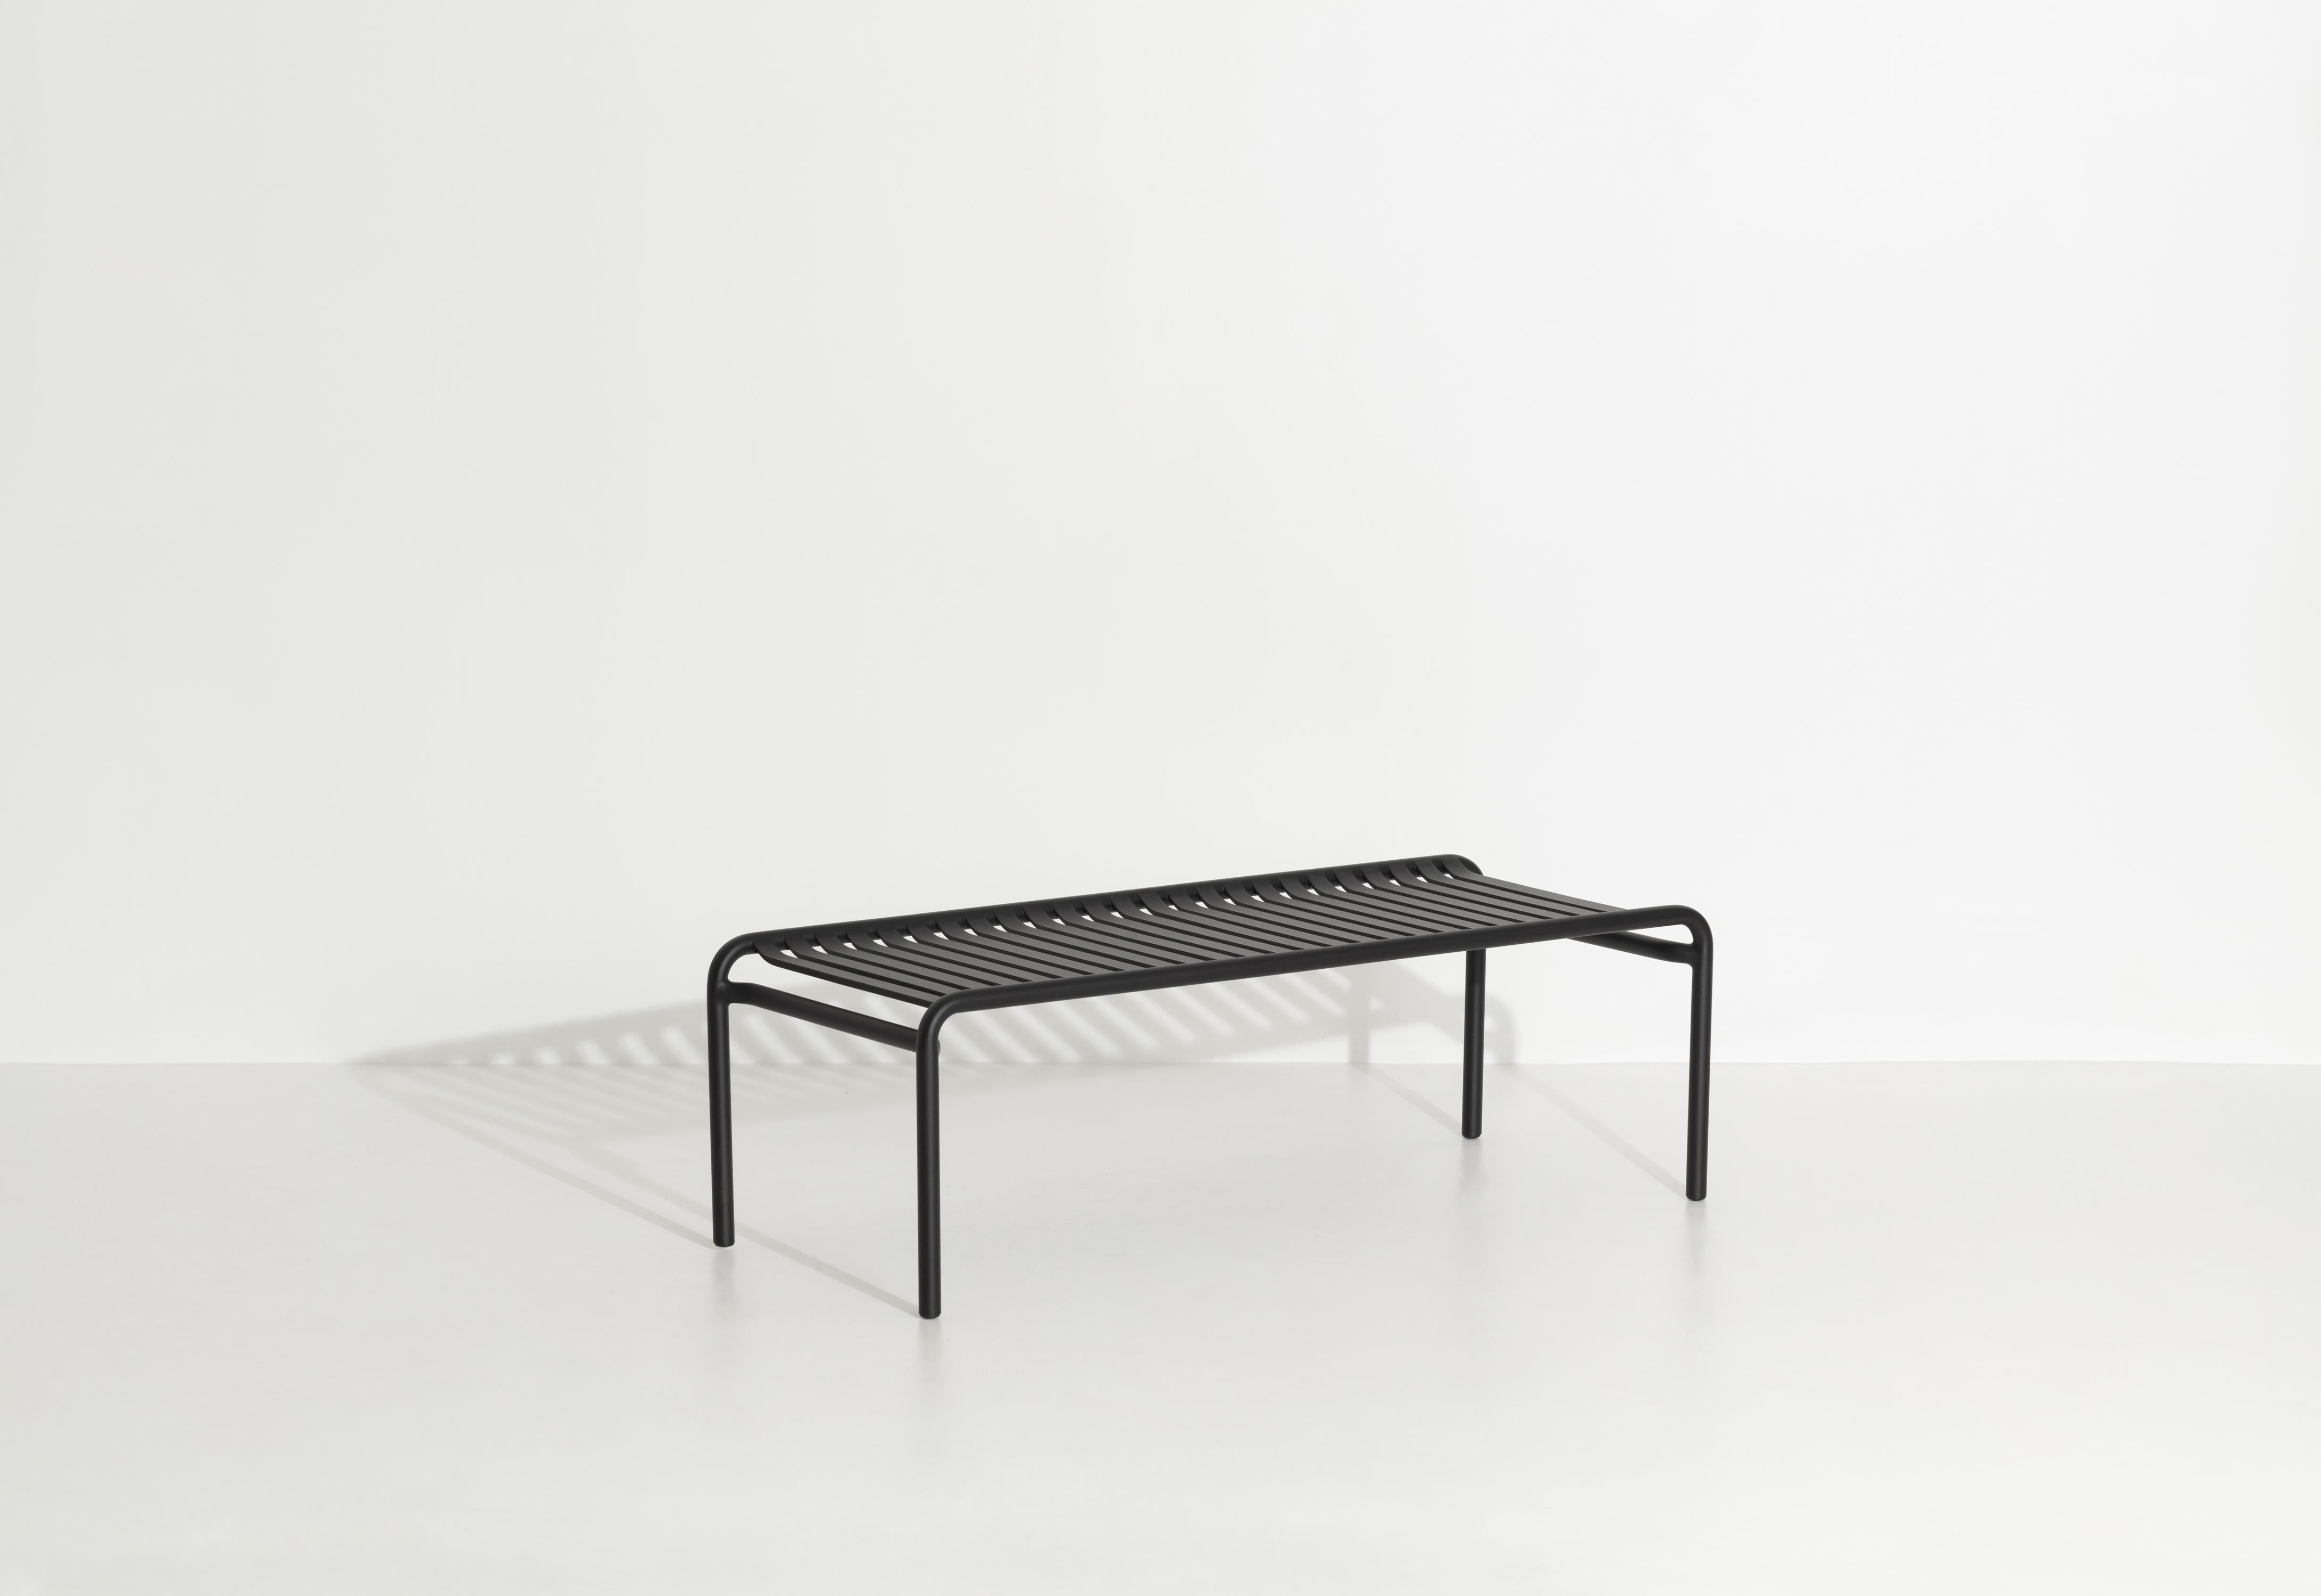 Chinese Petite Friture Week-End Long Coffee Table in Black Aluminium, 2017 For Sale